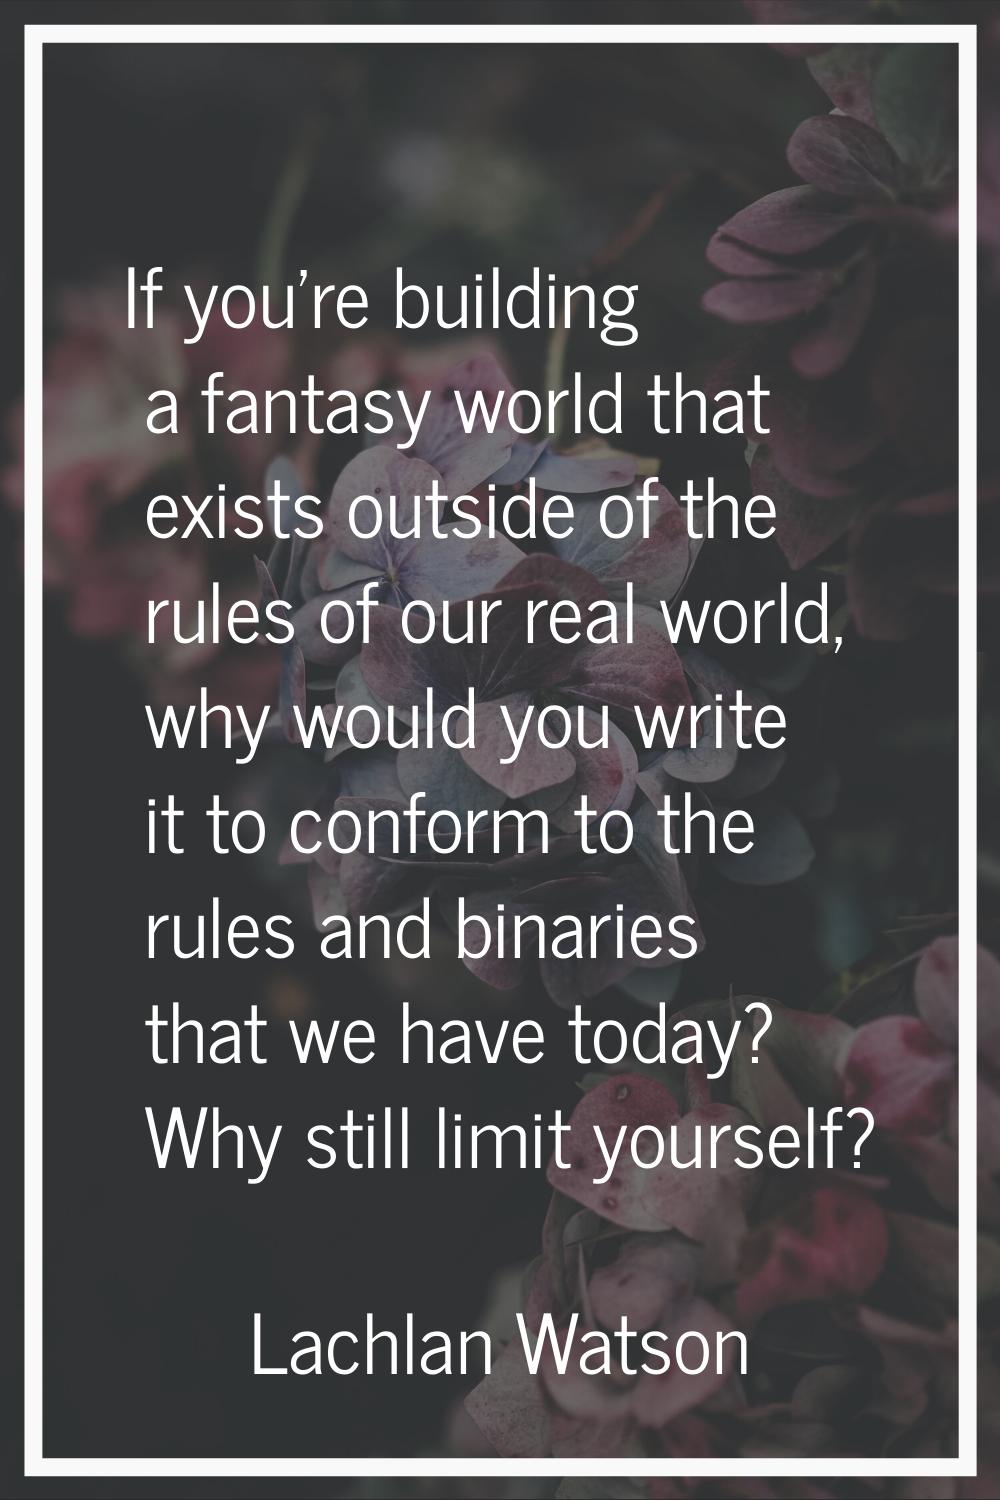 If you're building a fantasy world that exists outside of the rules of our real world, why would yo